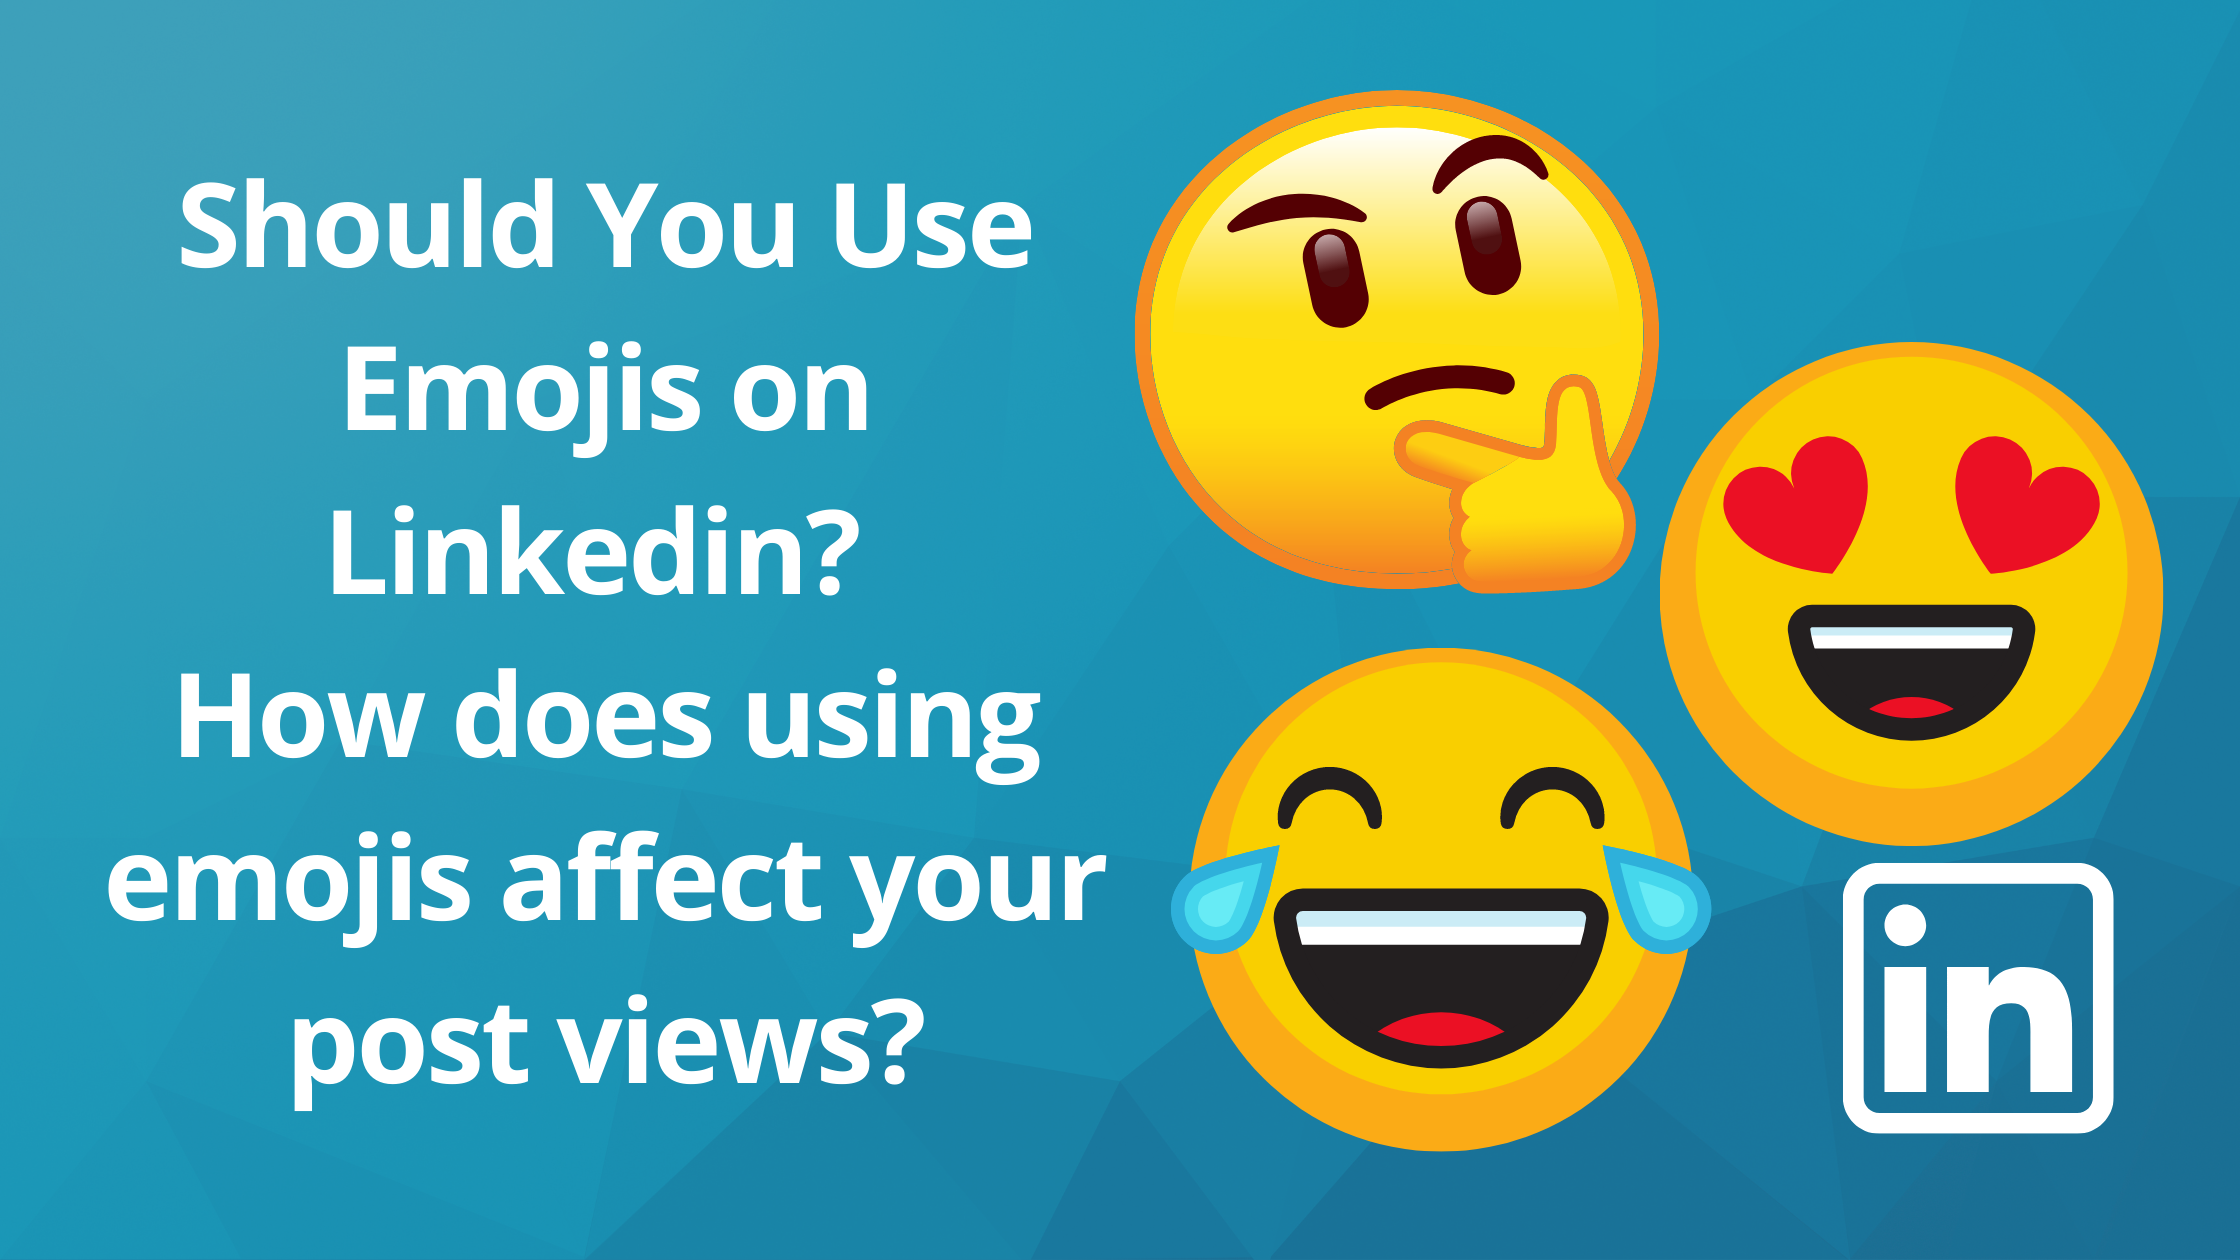 Should You Use Emojis on Linkedin? How does using emojis affect your post views?